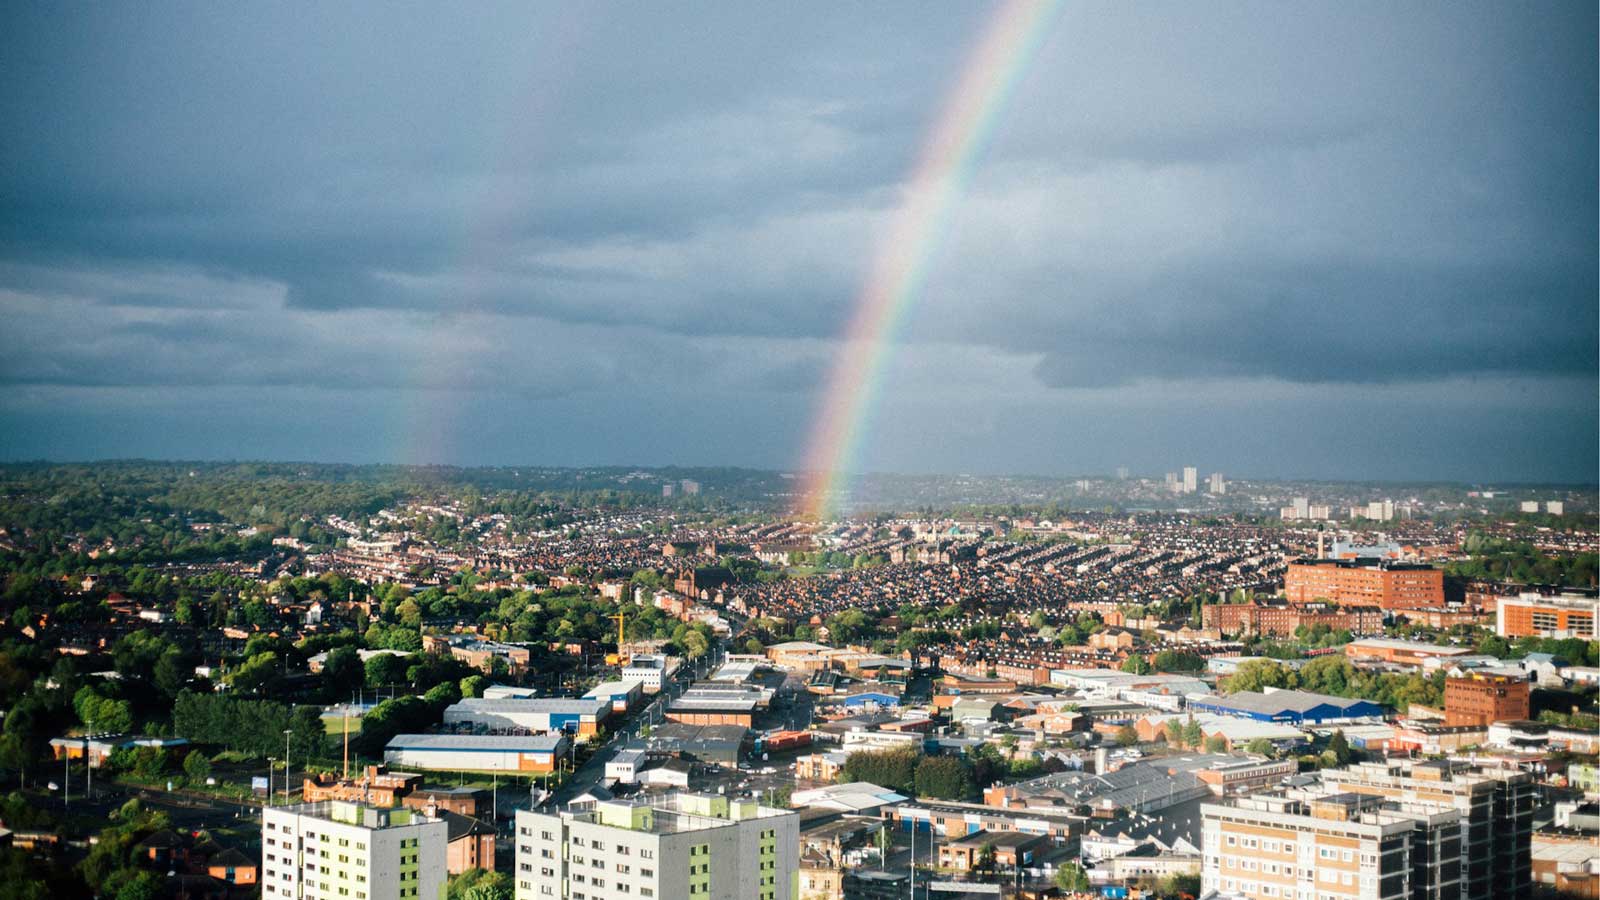 An image of the Leeds skyline, with a blue-grey sky and rainbow above.